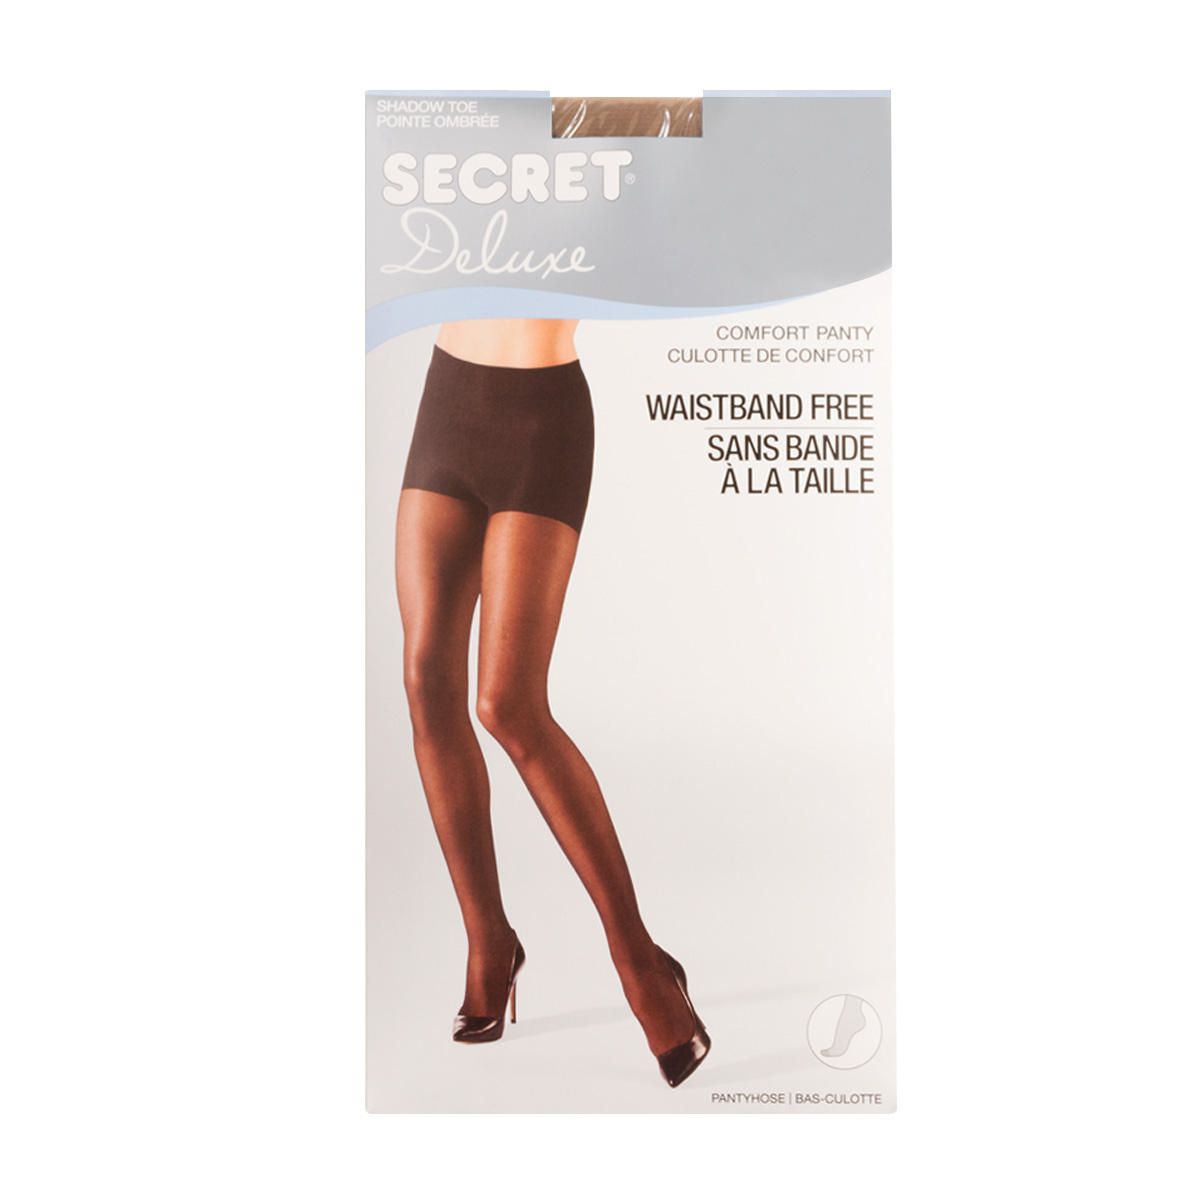 Secret® Comfy-Top Waistband-Free Tights 1pk, Size: A to D